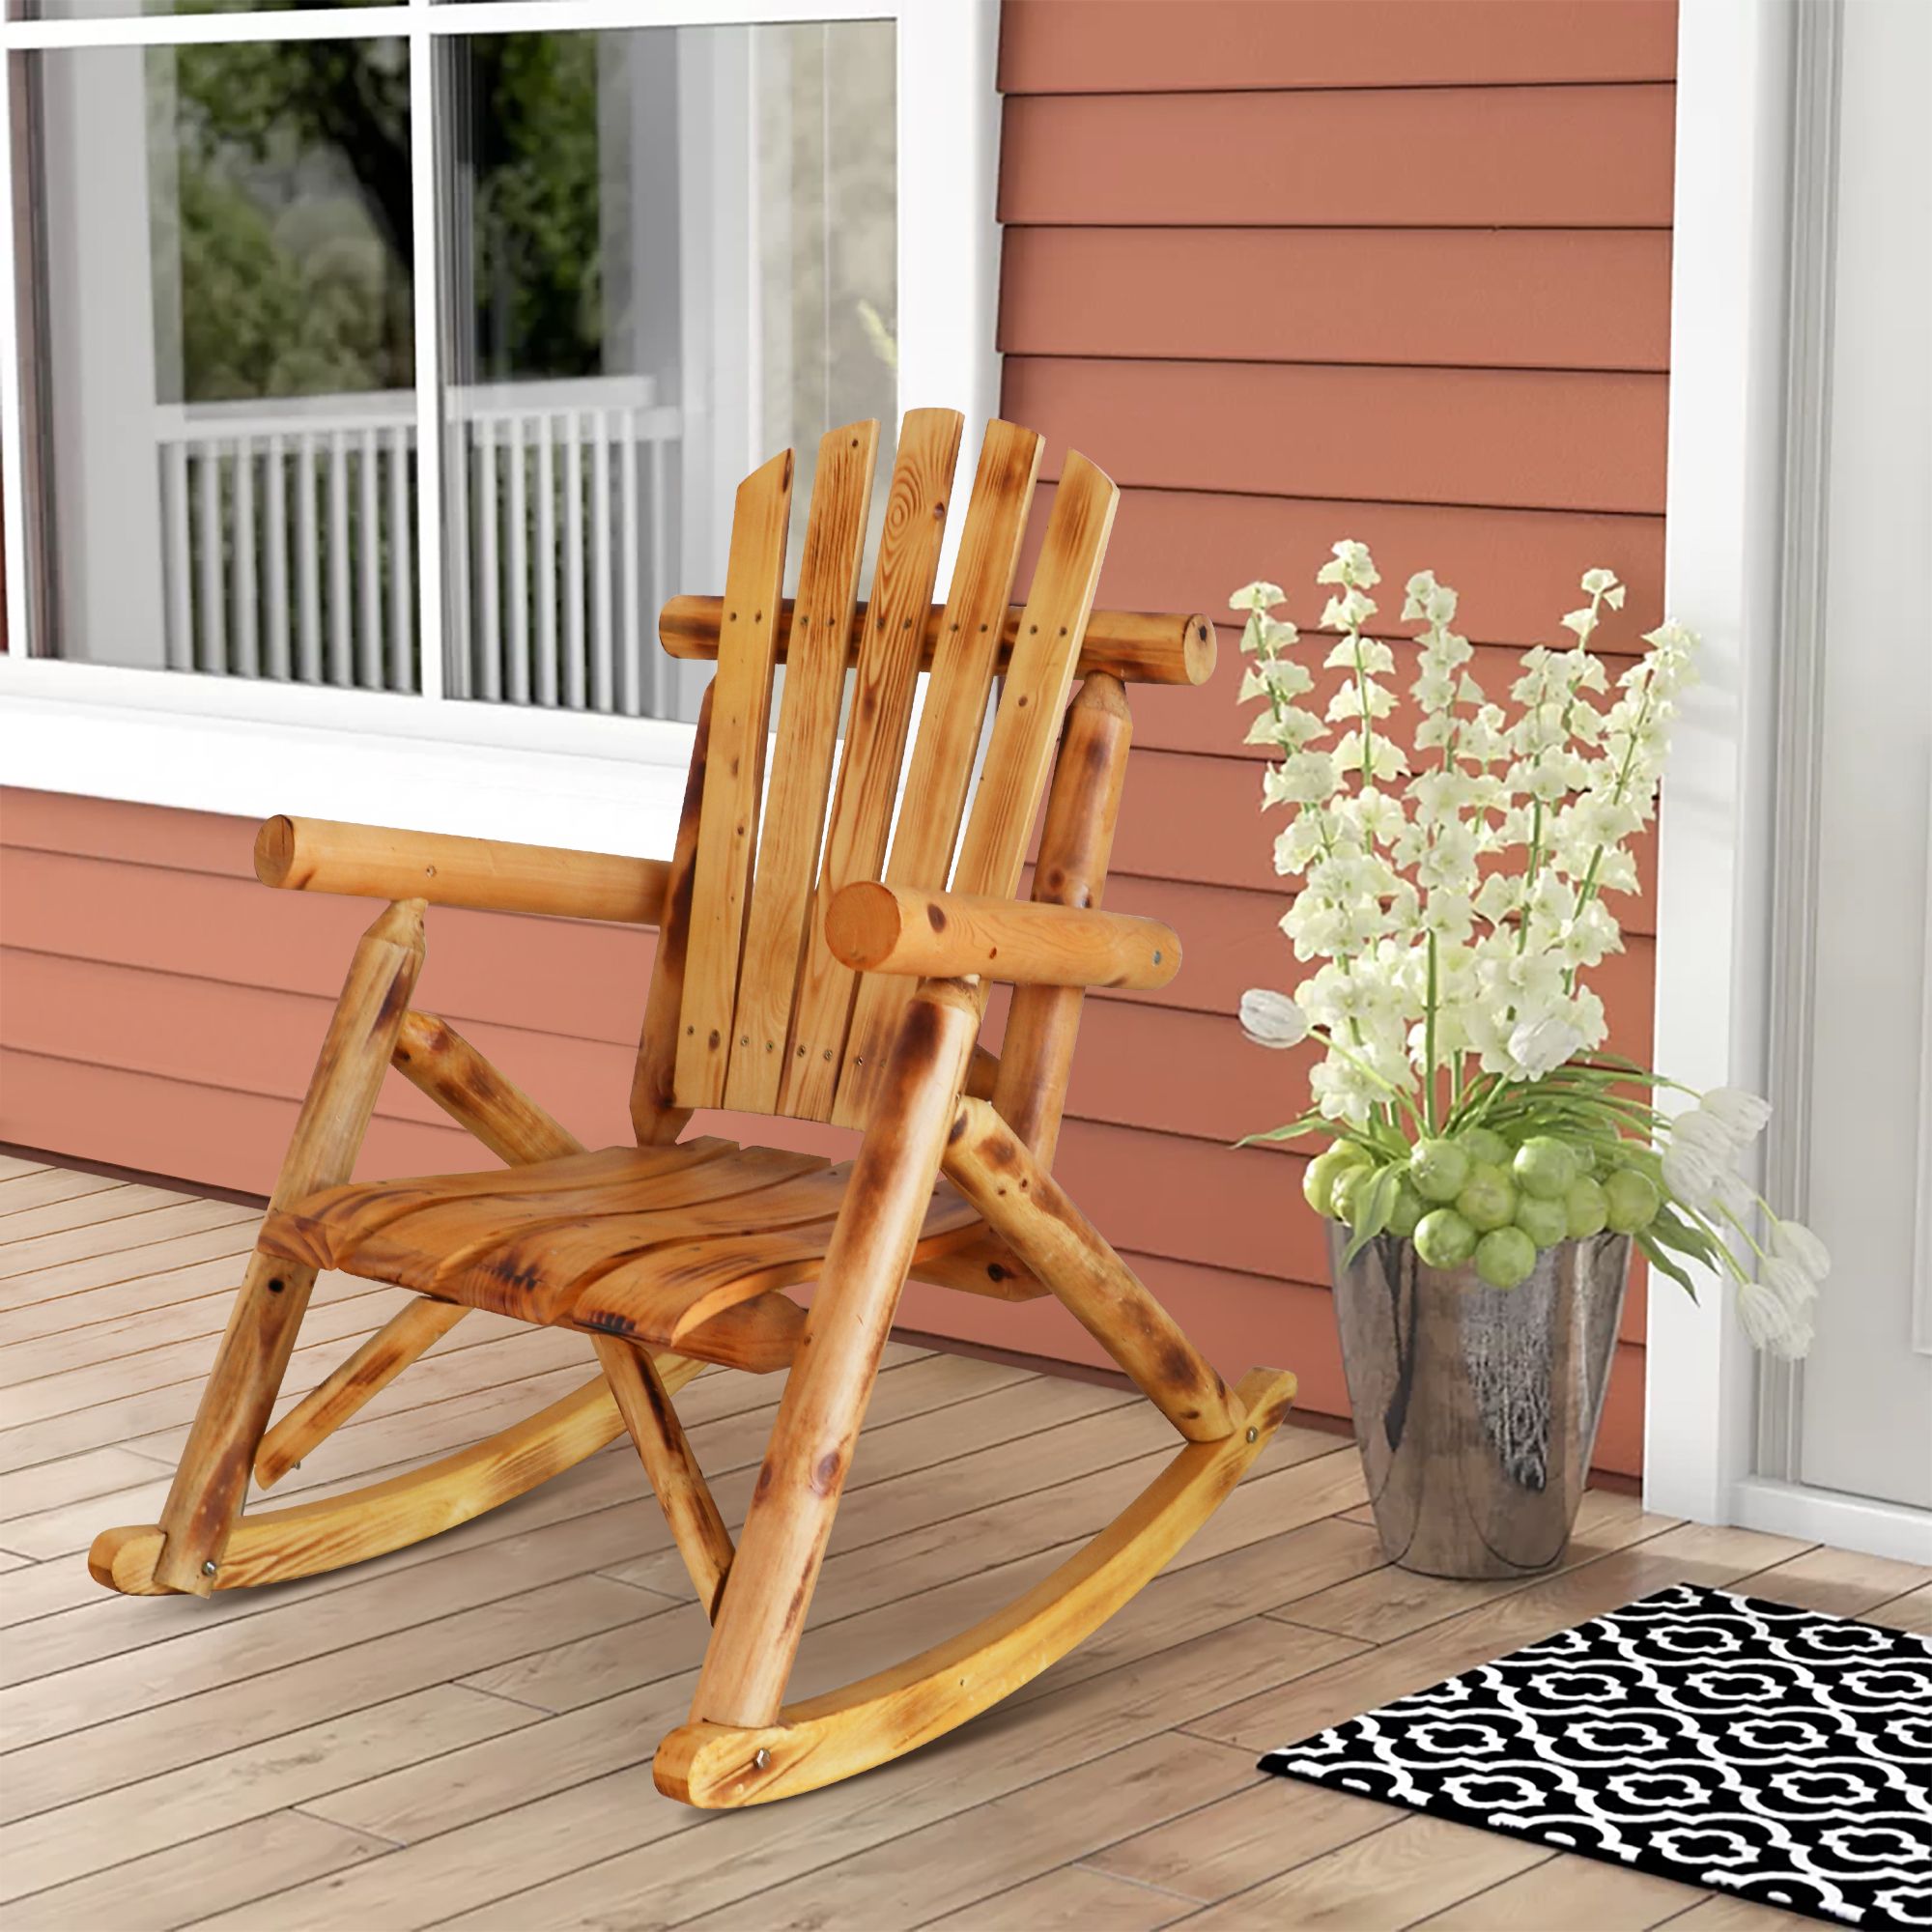 Natural Wood Outdoor Chairs Within Widely Used Outdoor Rocking Chair, Wooden Rocking Chair Patio Furniture, Classic (View 14 of 15)